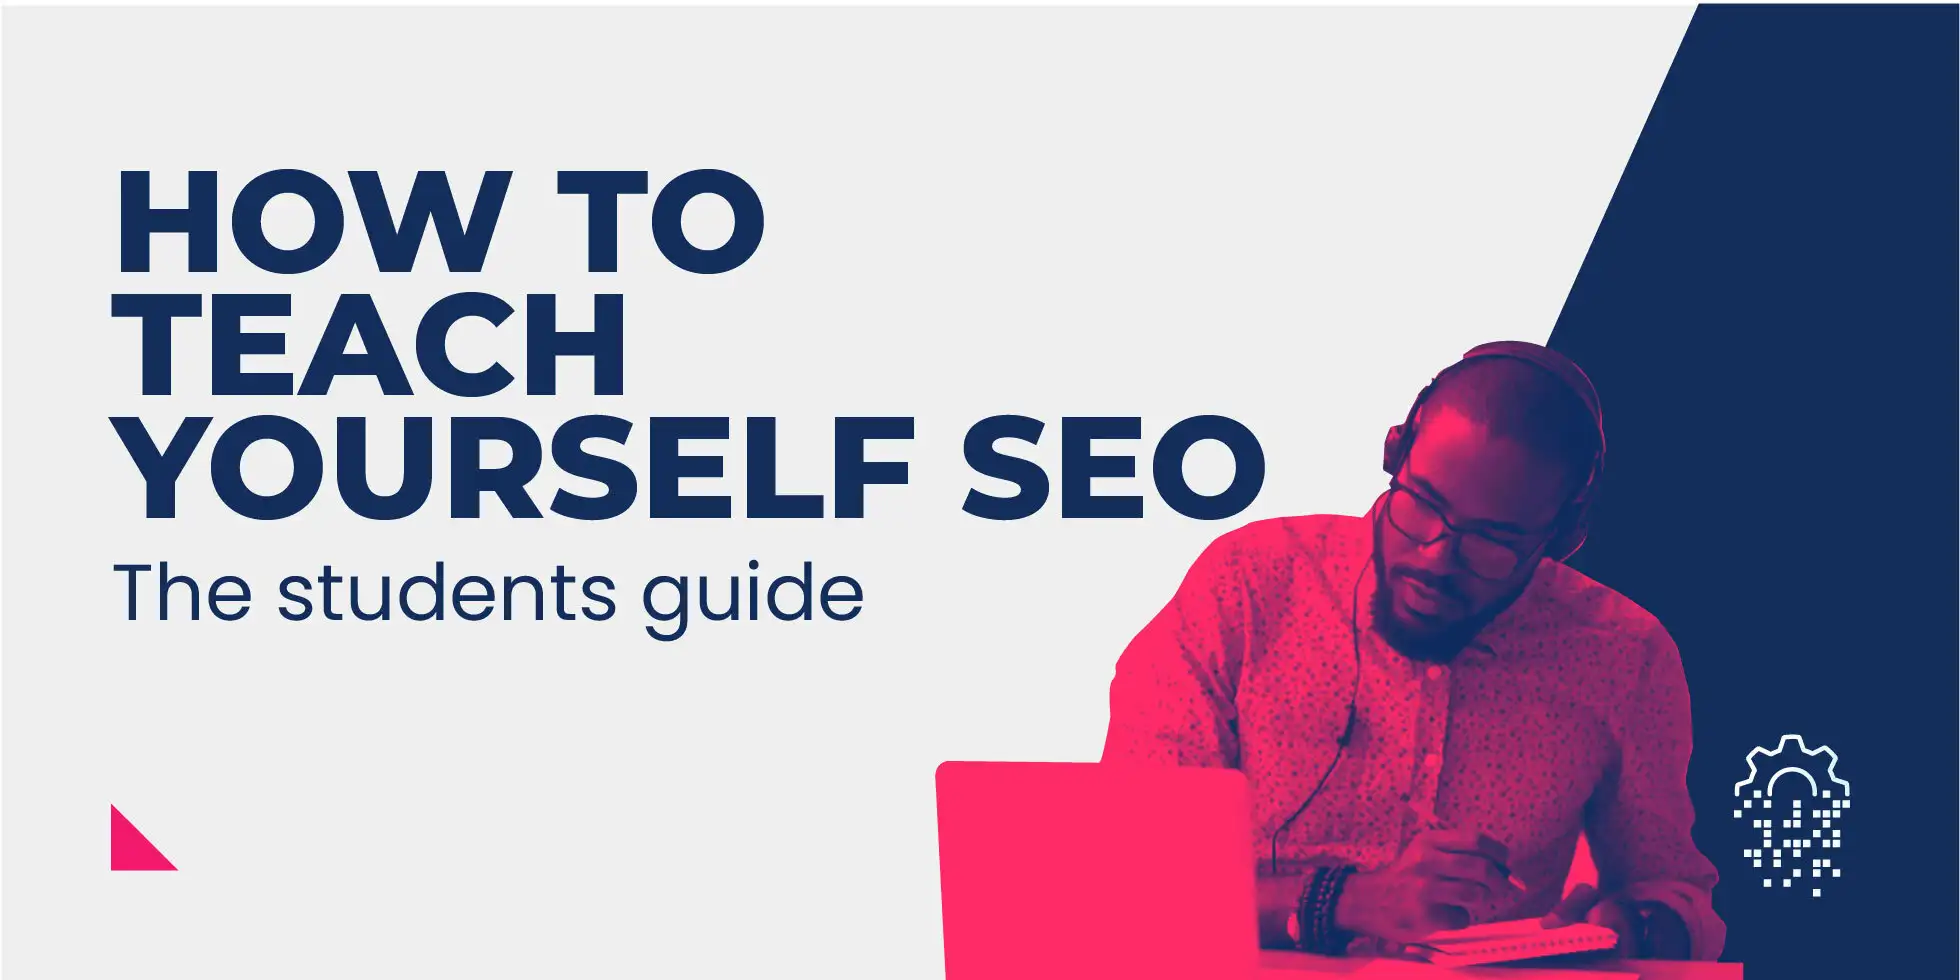 How to Teach Yourself SEO (the Student's Guide)